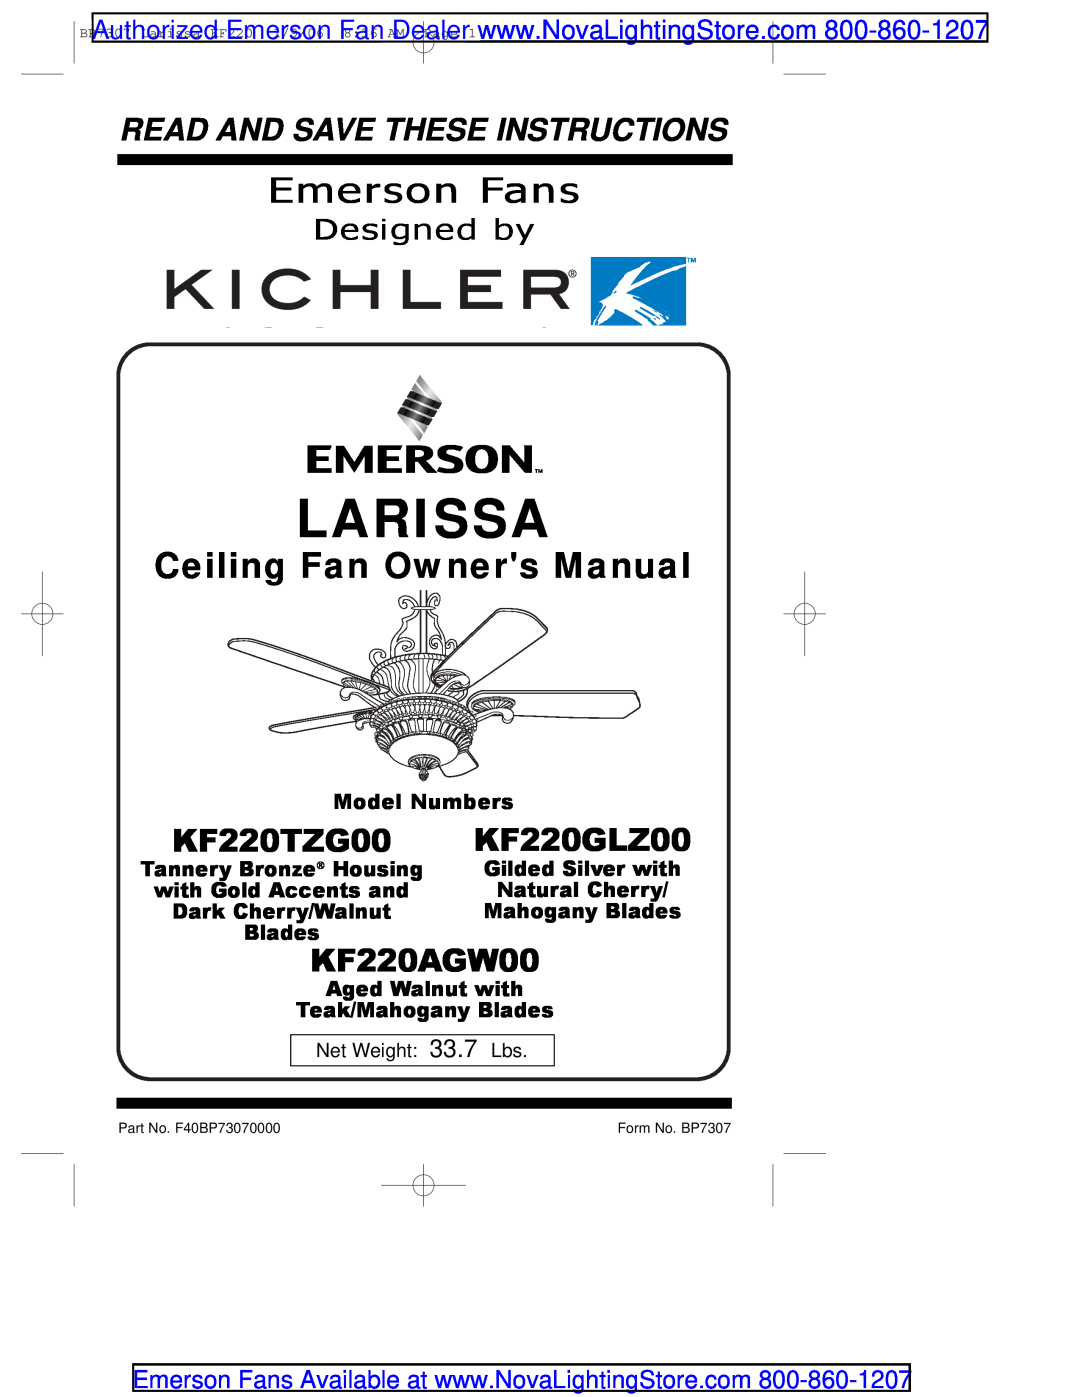 Emerson kf220tzg00 owner manual Larissa, Emerson Fans, KF220AGW00, Read And Save These Instructions, KF220TZG00, Blades 